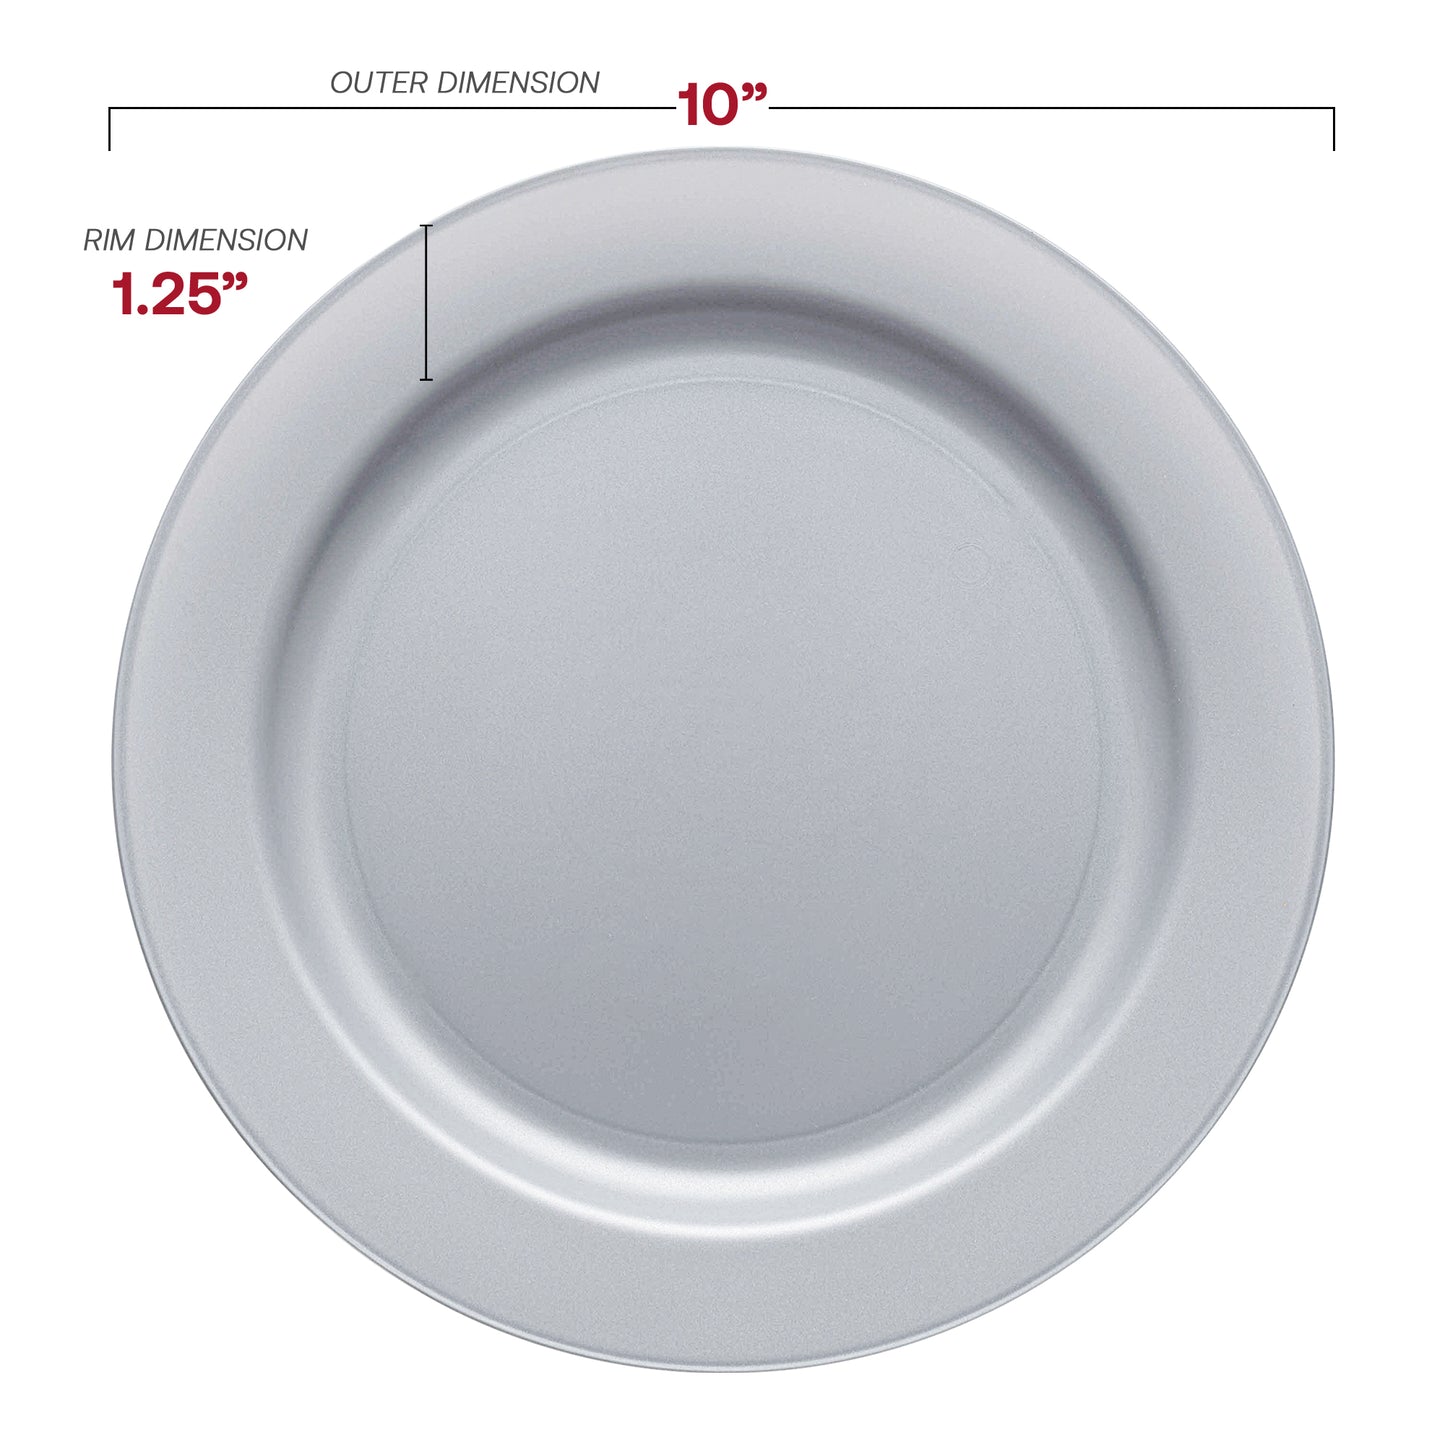 Matte Steel Gray Round Plastic Dinner Plates (10") Dimension | The Kaya Collection